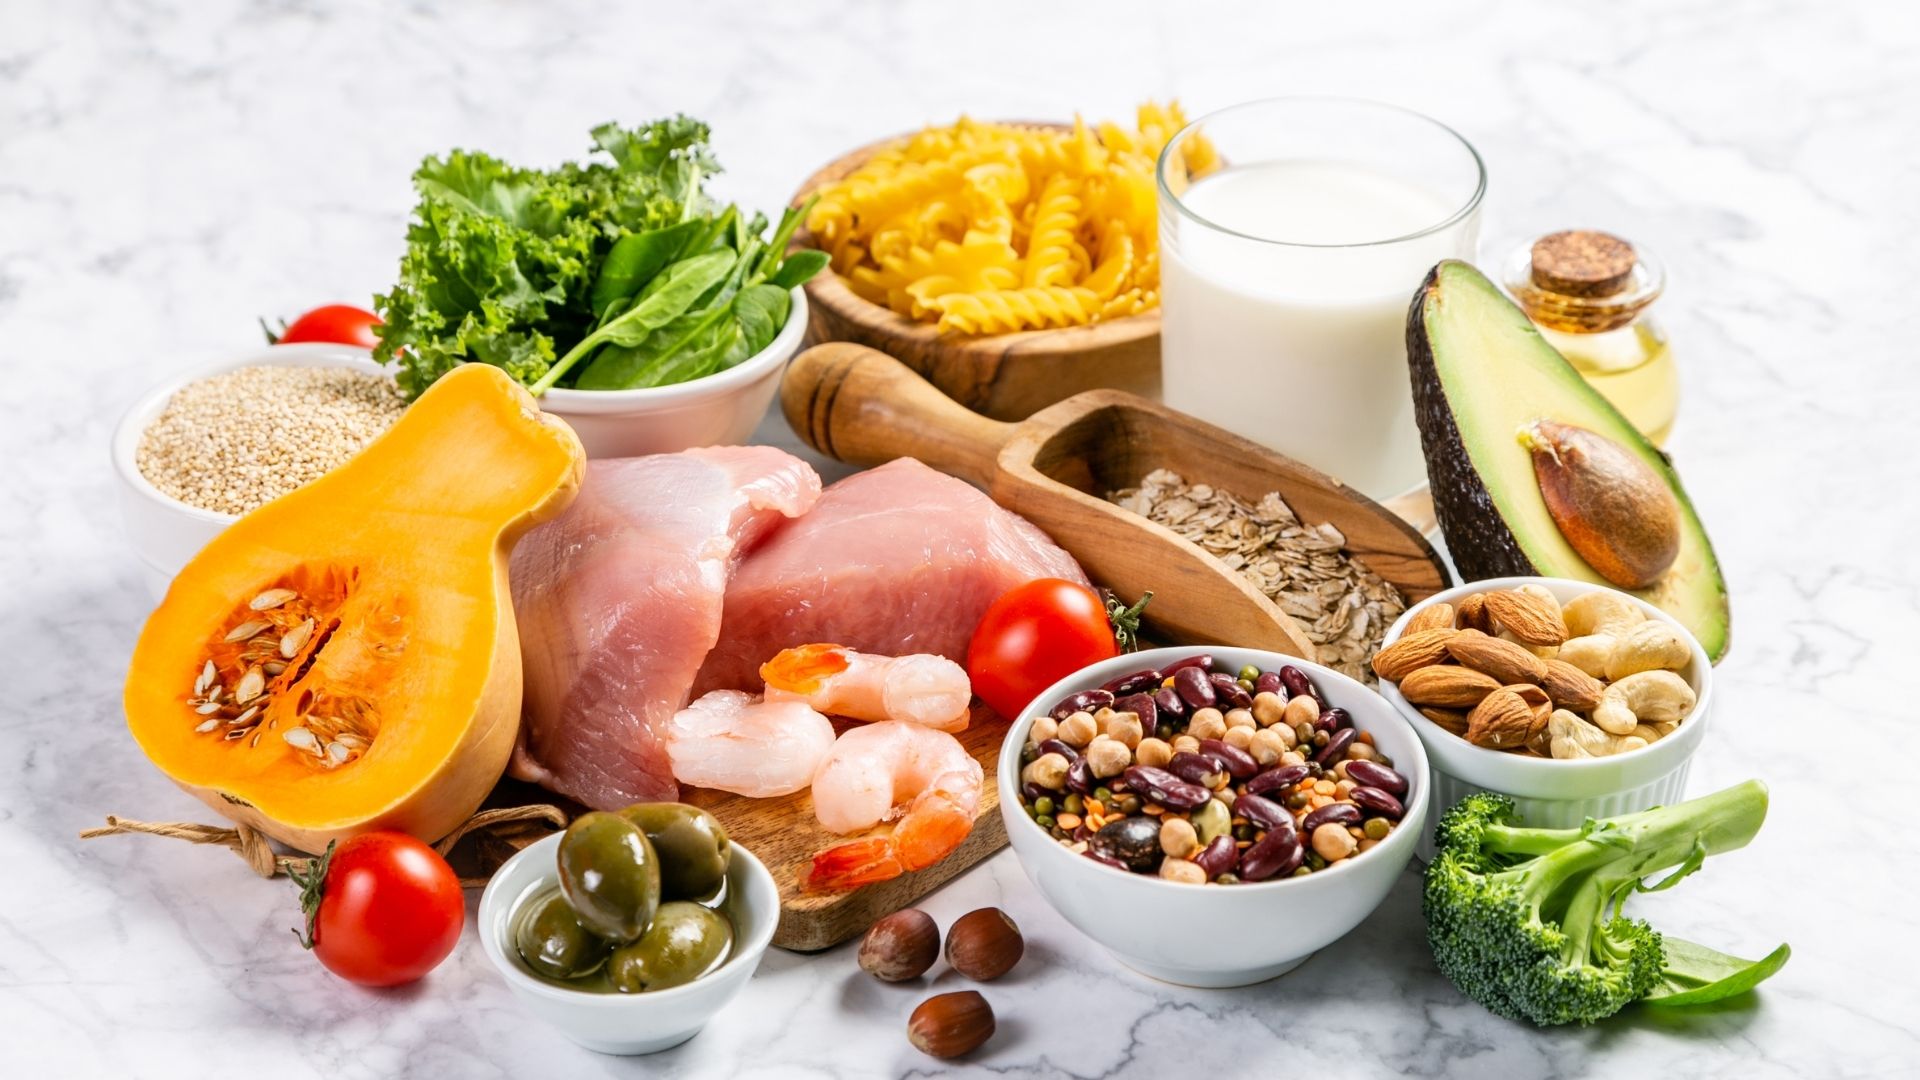 Mediterranean Diet Review: Is It Worth the Hype?